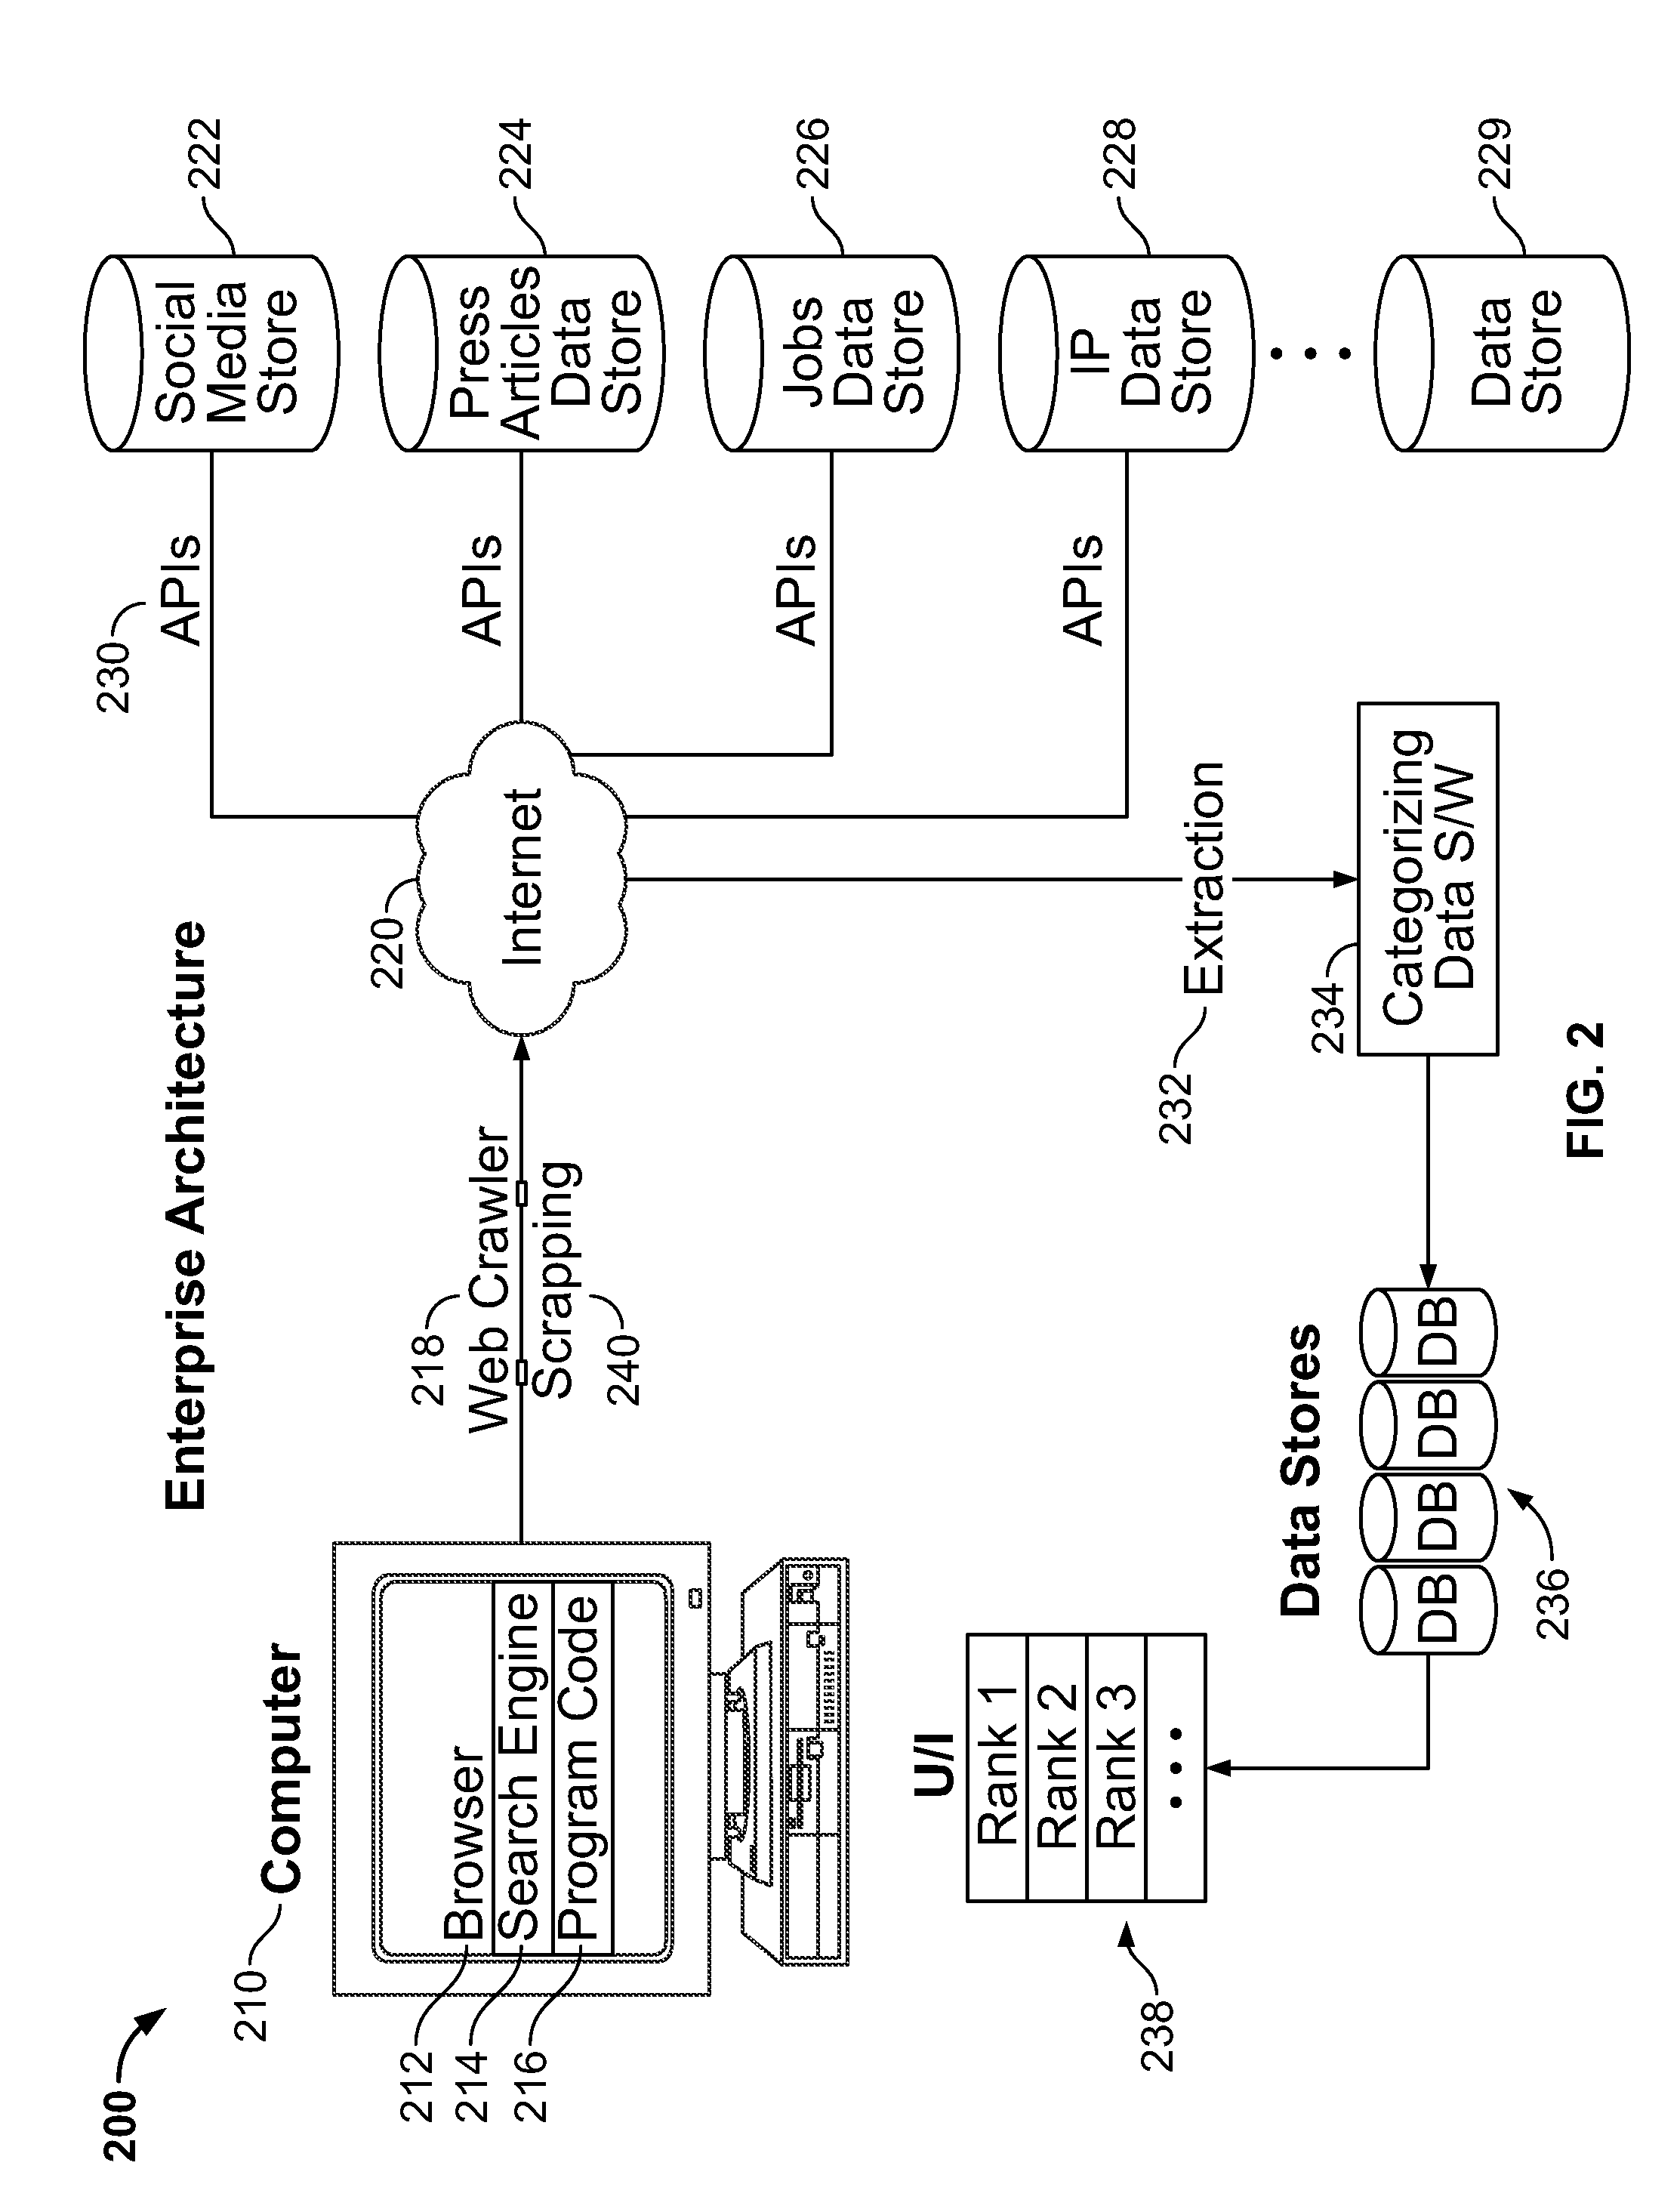 System and method for identifying growing companies and monitoring growth using non-obvious parameters